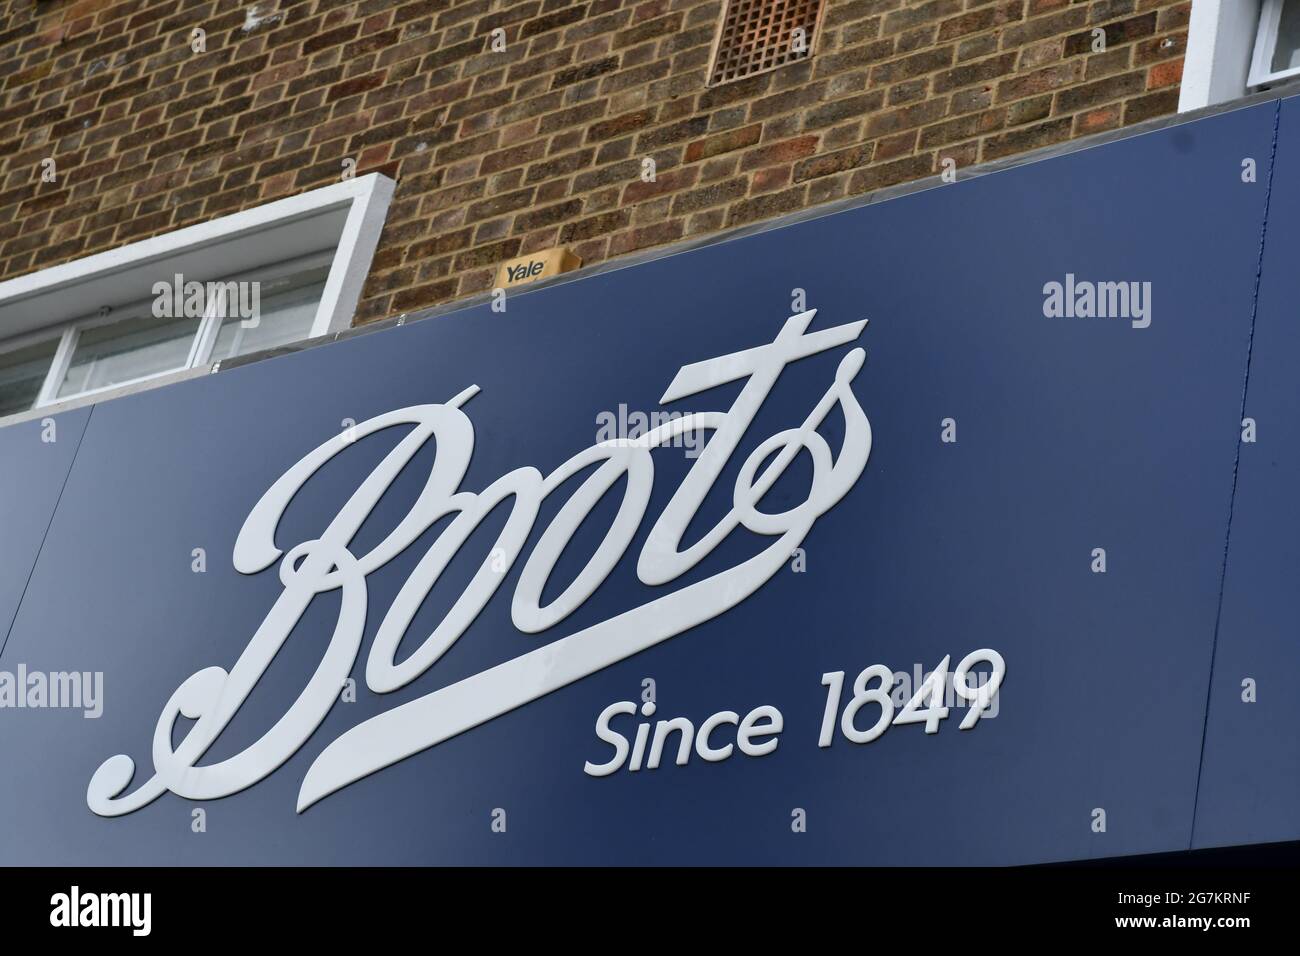 Boots the chemist advertising sign outside one of its retail stores in ...